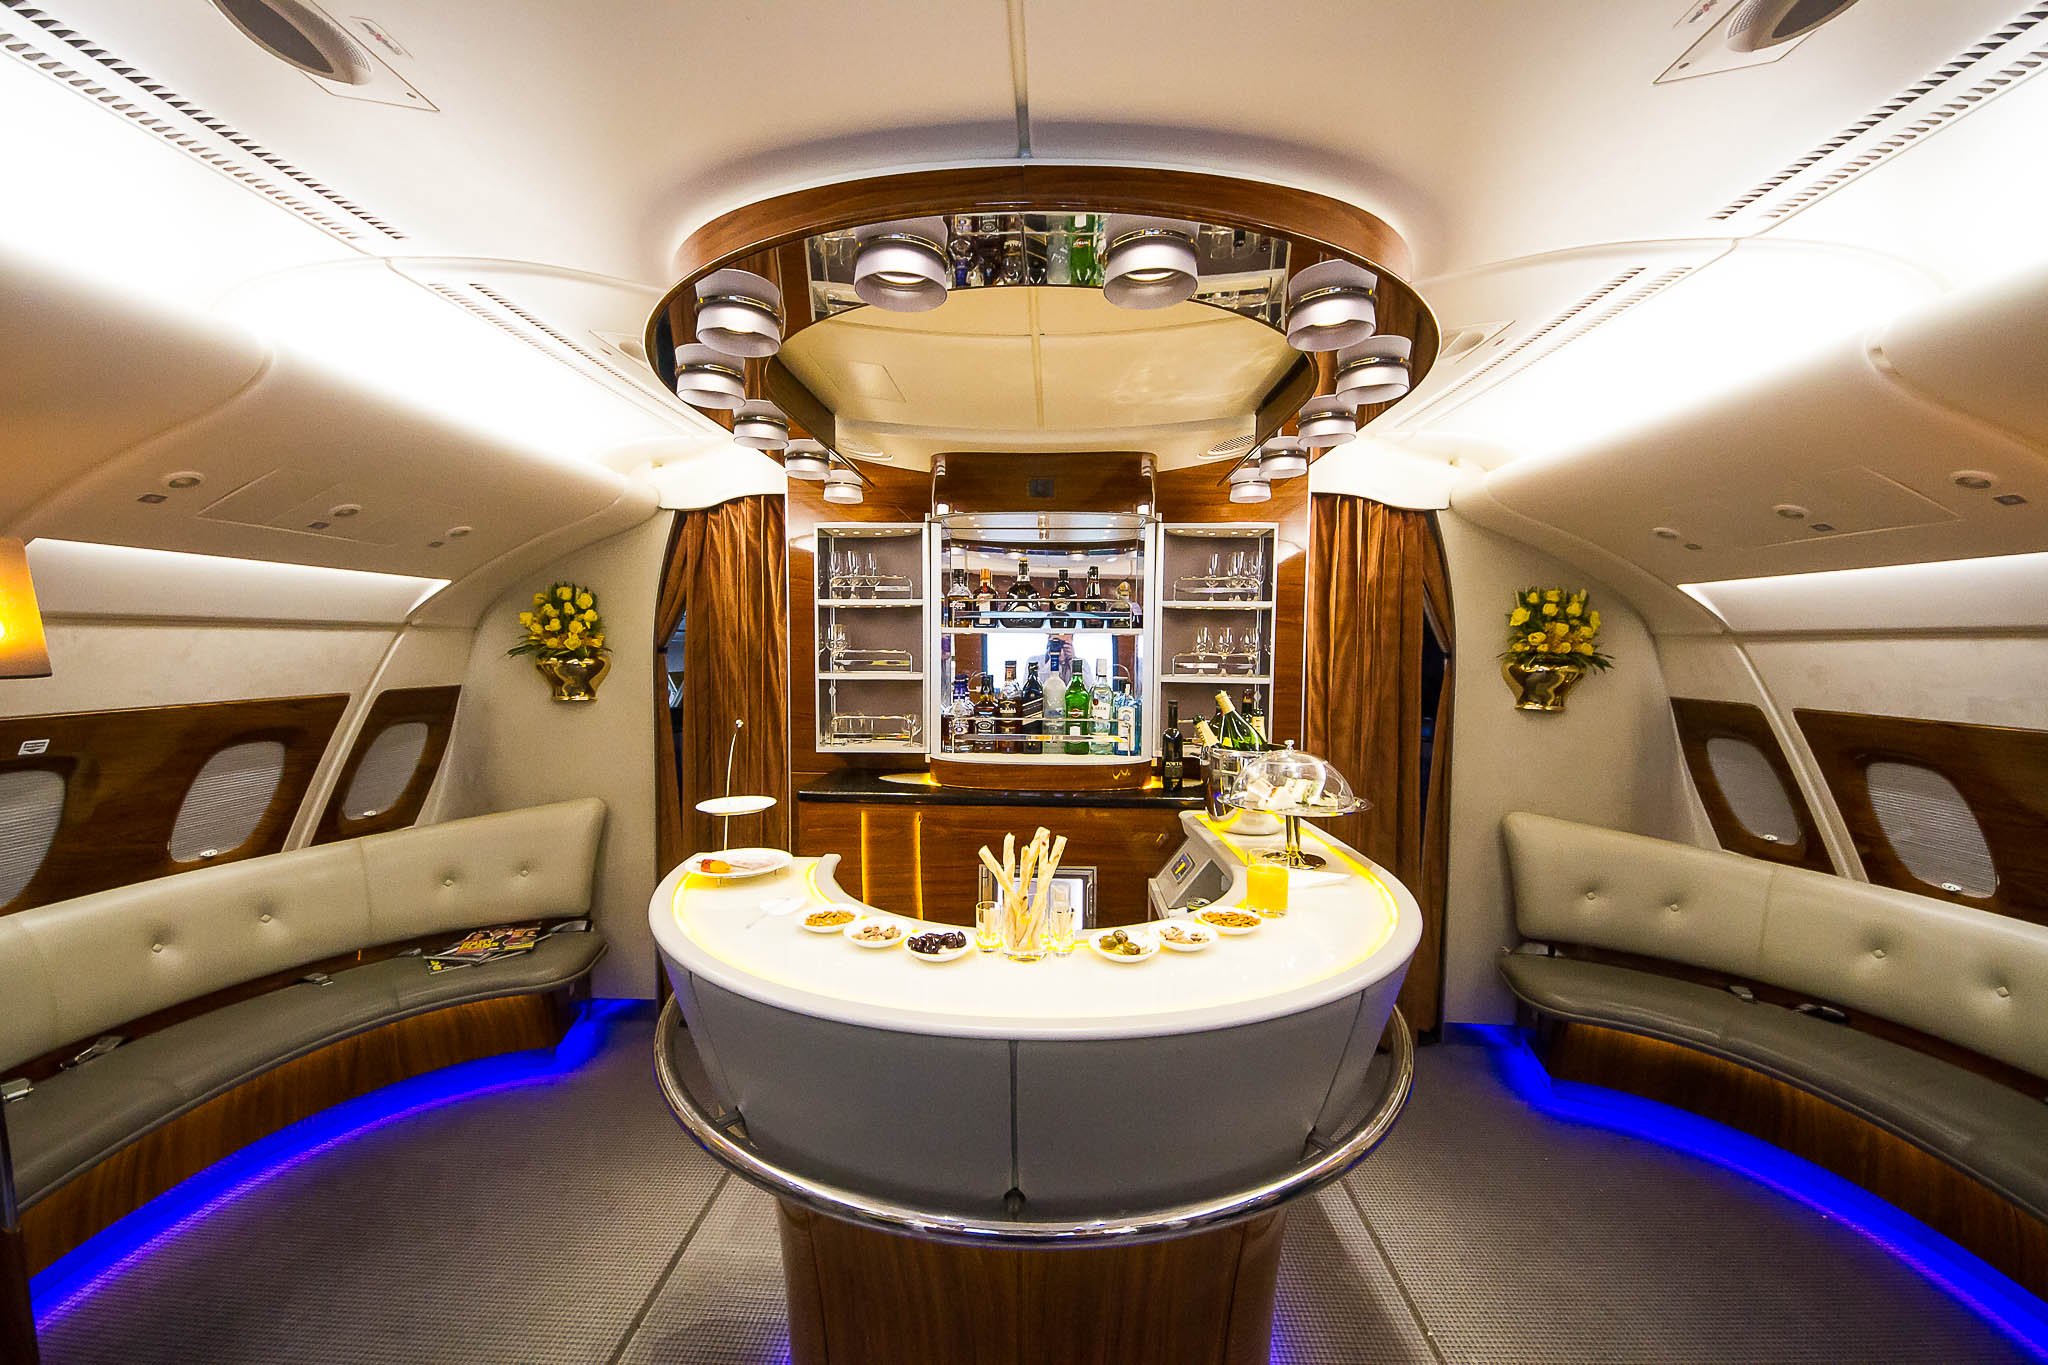 First class 0. Airbus a380 внутри. Самолет Emirates a380 салон. Airbus a380 Emirates первый класс. Первый класс Эмирейтс а380.